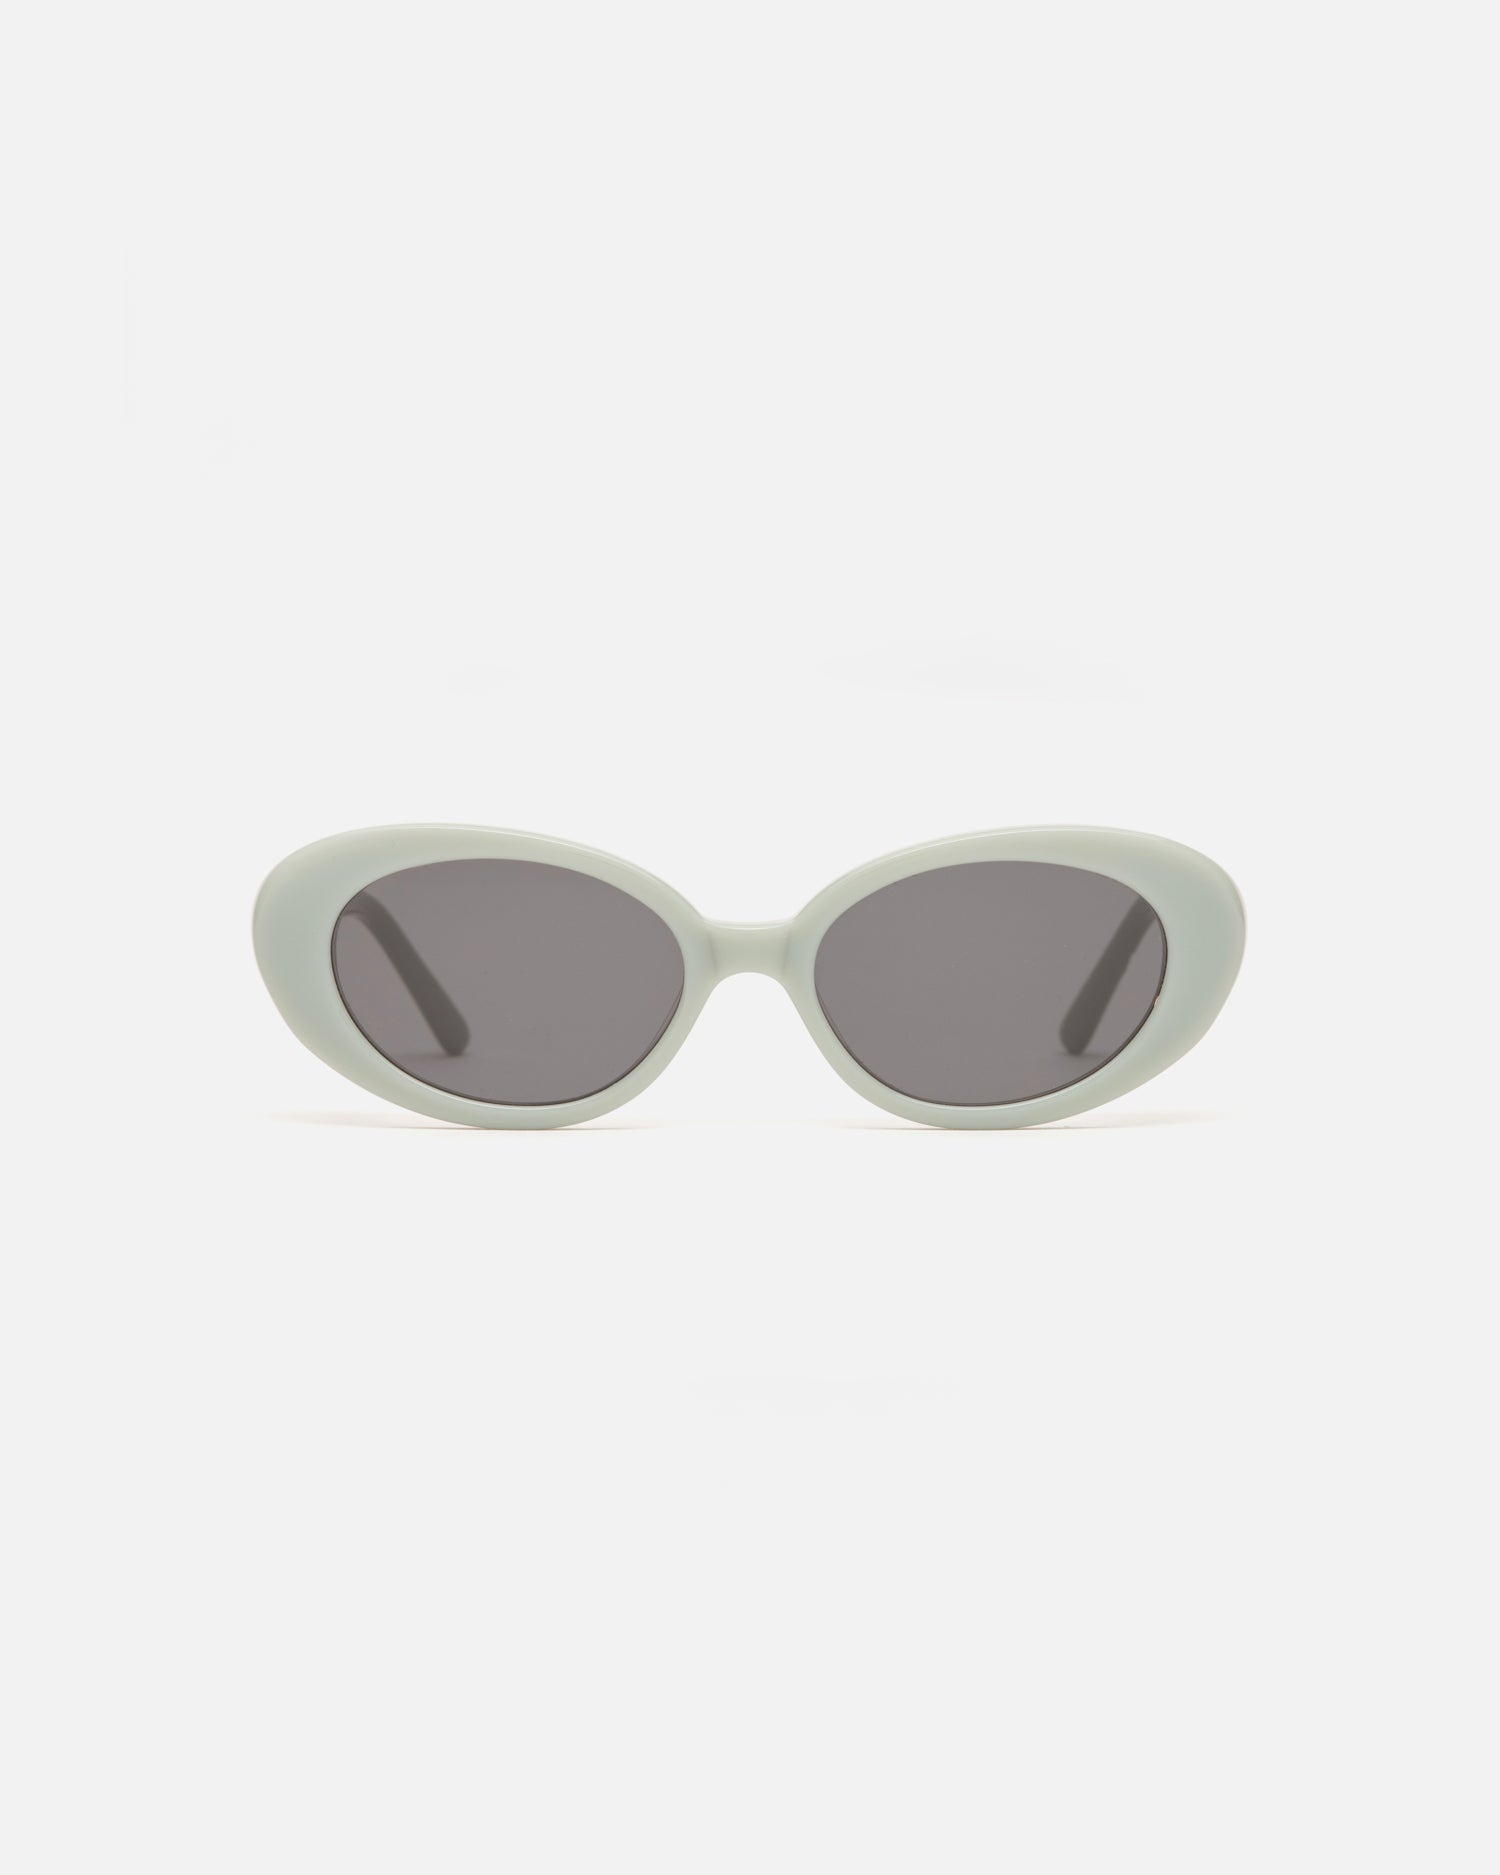 Lu Goldie Jeanne round Sunglasses in sage blue acetate with black lenses, front image